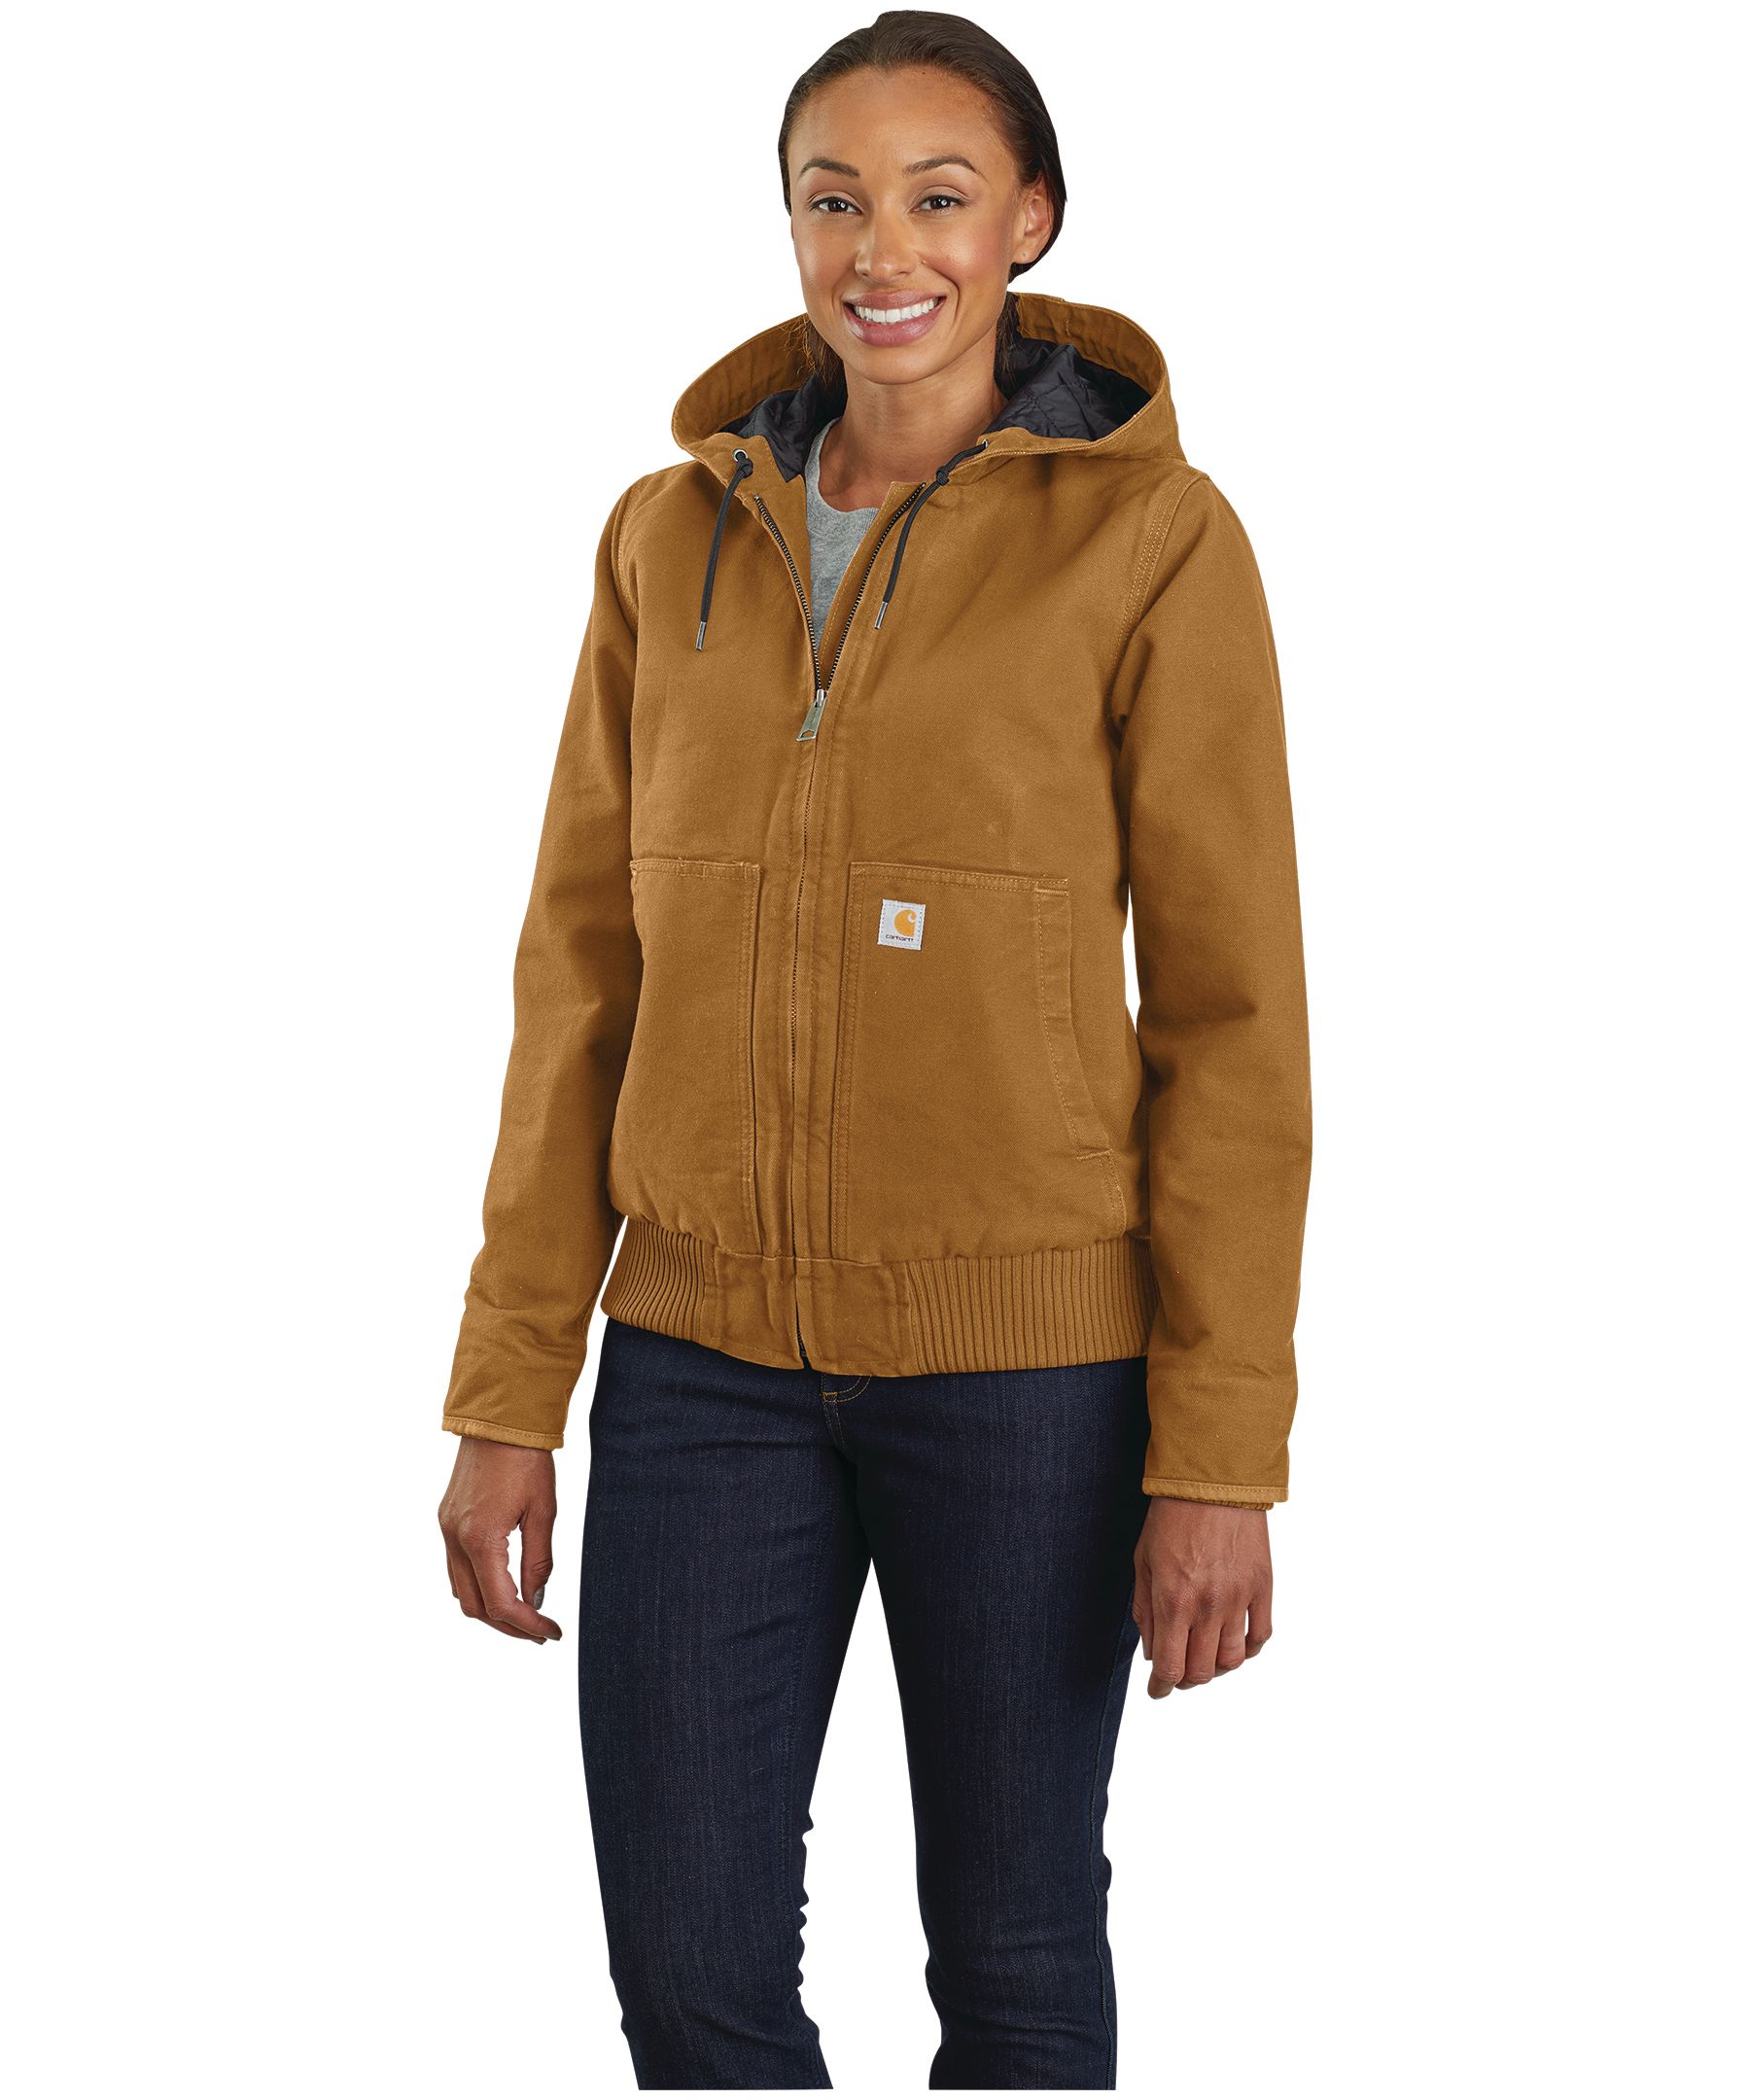 https://media-www.marks.com/product/marks-work-wearhouse/industrial-world/workwear/410036673671/womens-carhartt-washed-duck-insulated-active-jackt-454c7ee2-4d2b-4480-bf52-5dbcb9cc6c52-jpgrendition.jpg?imdensity=1&imwidth=1244&impolicy=mZoom